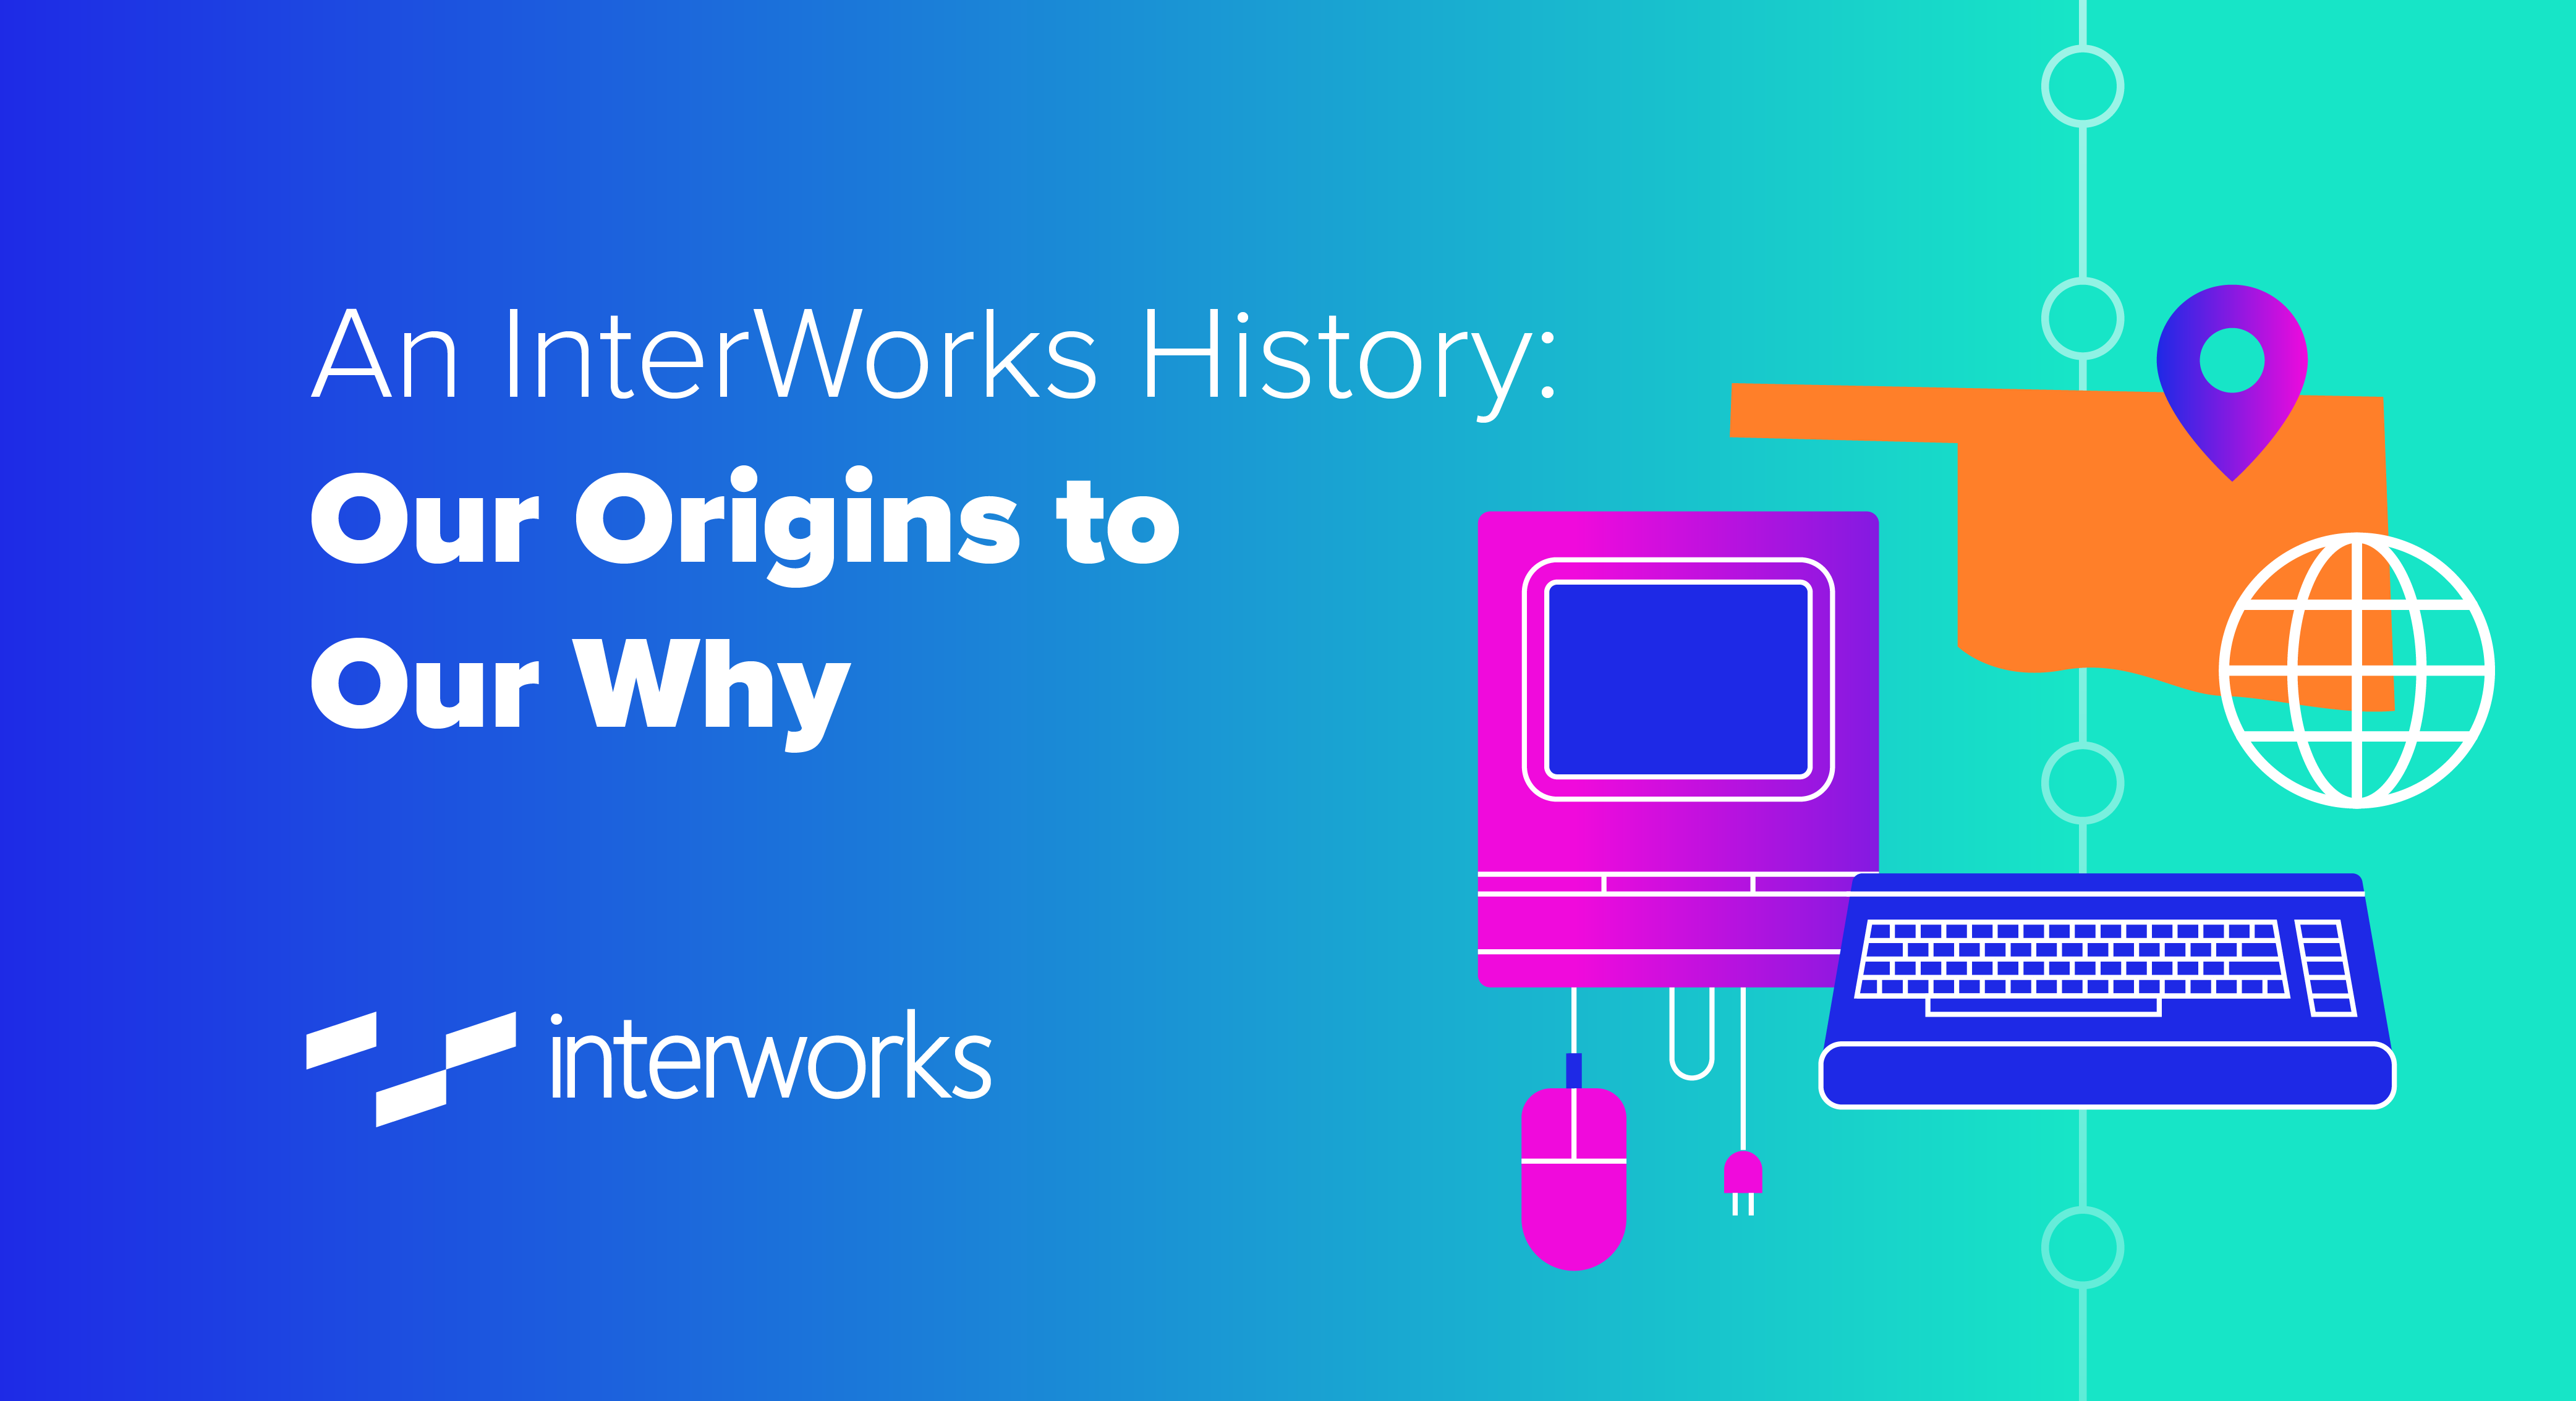 An InterWorks History: Our Origins to Our Why